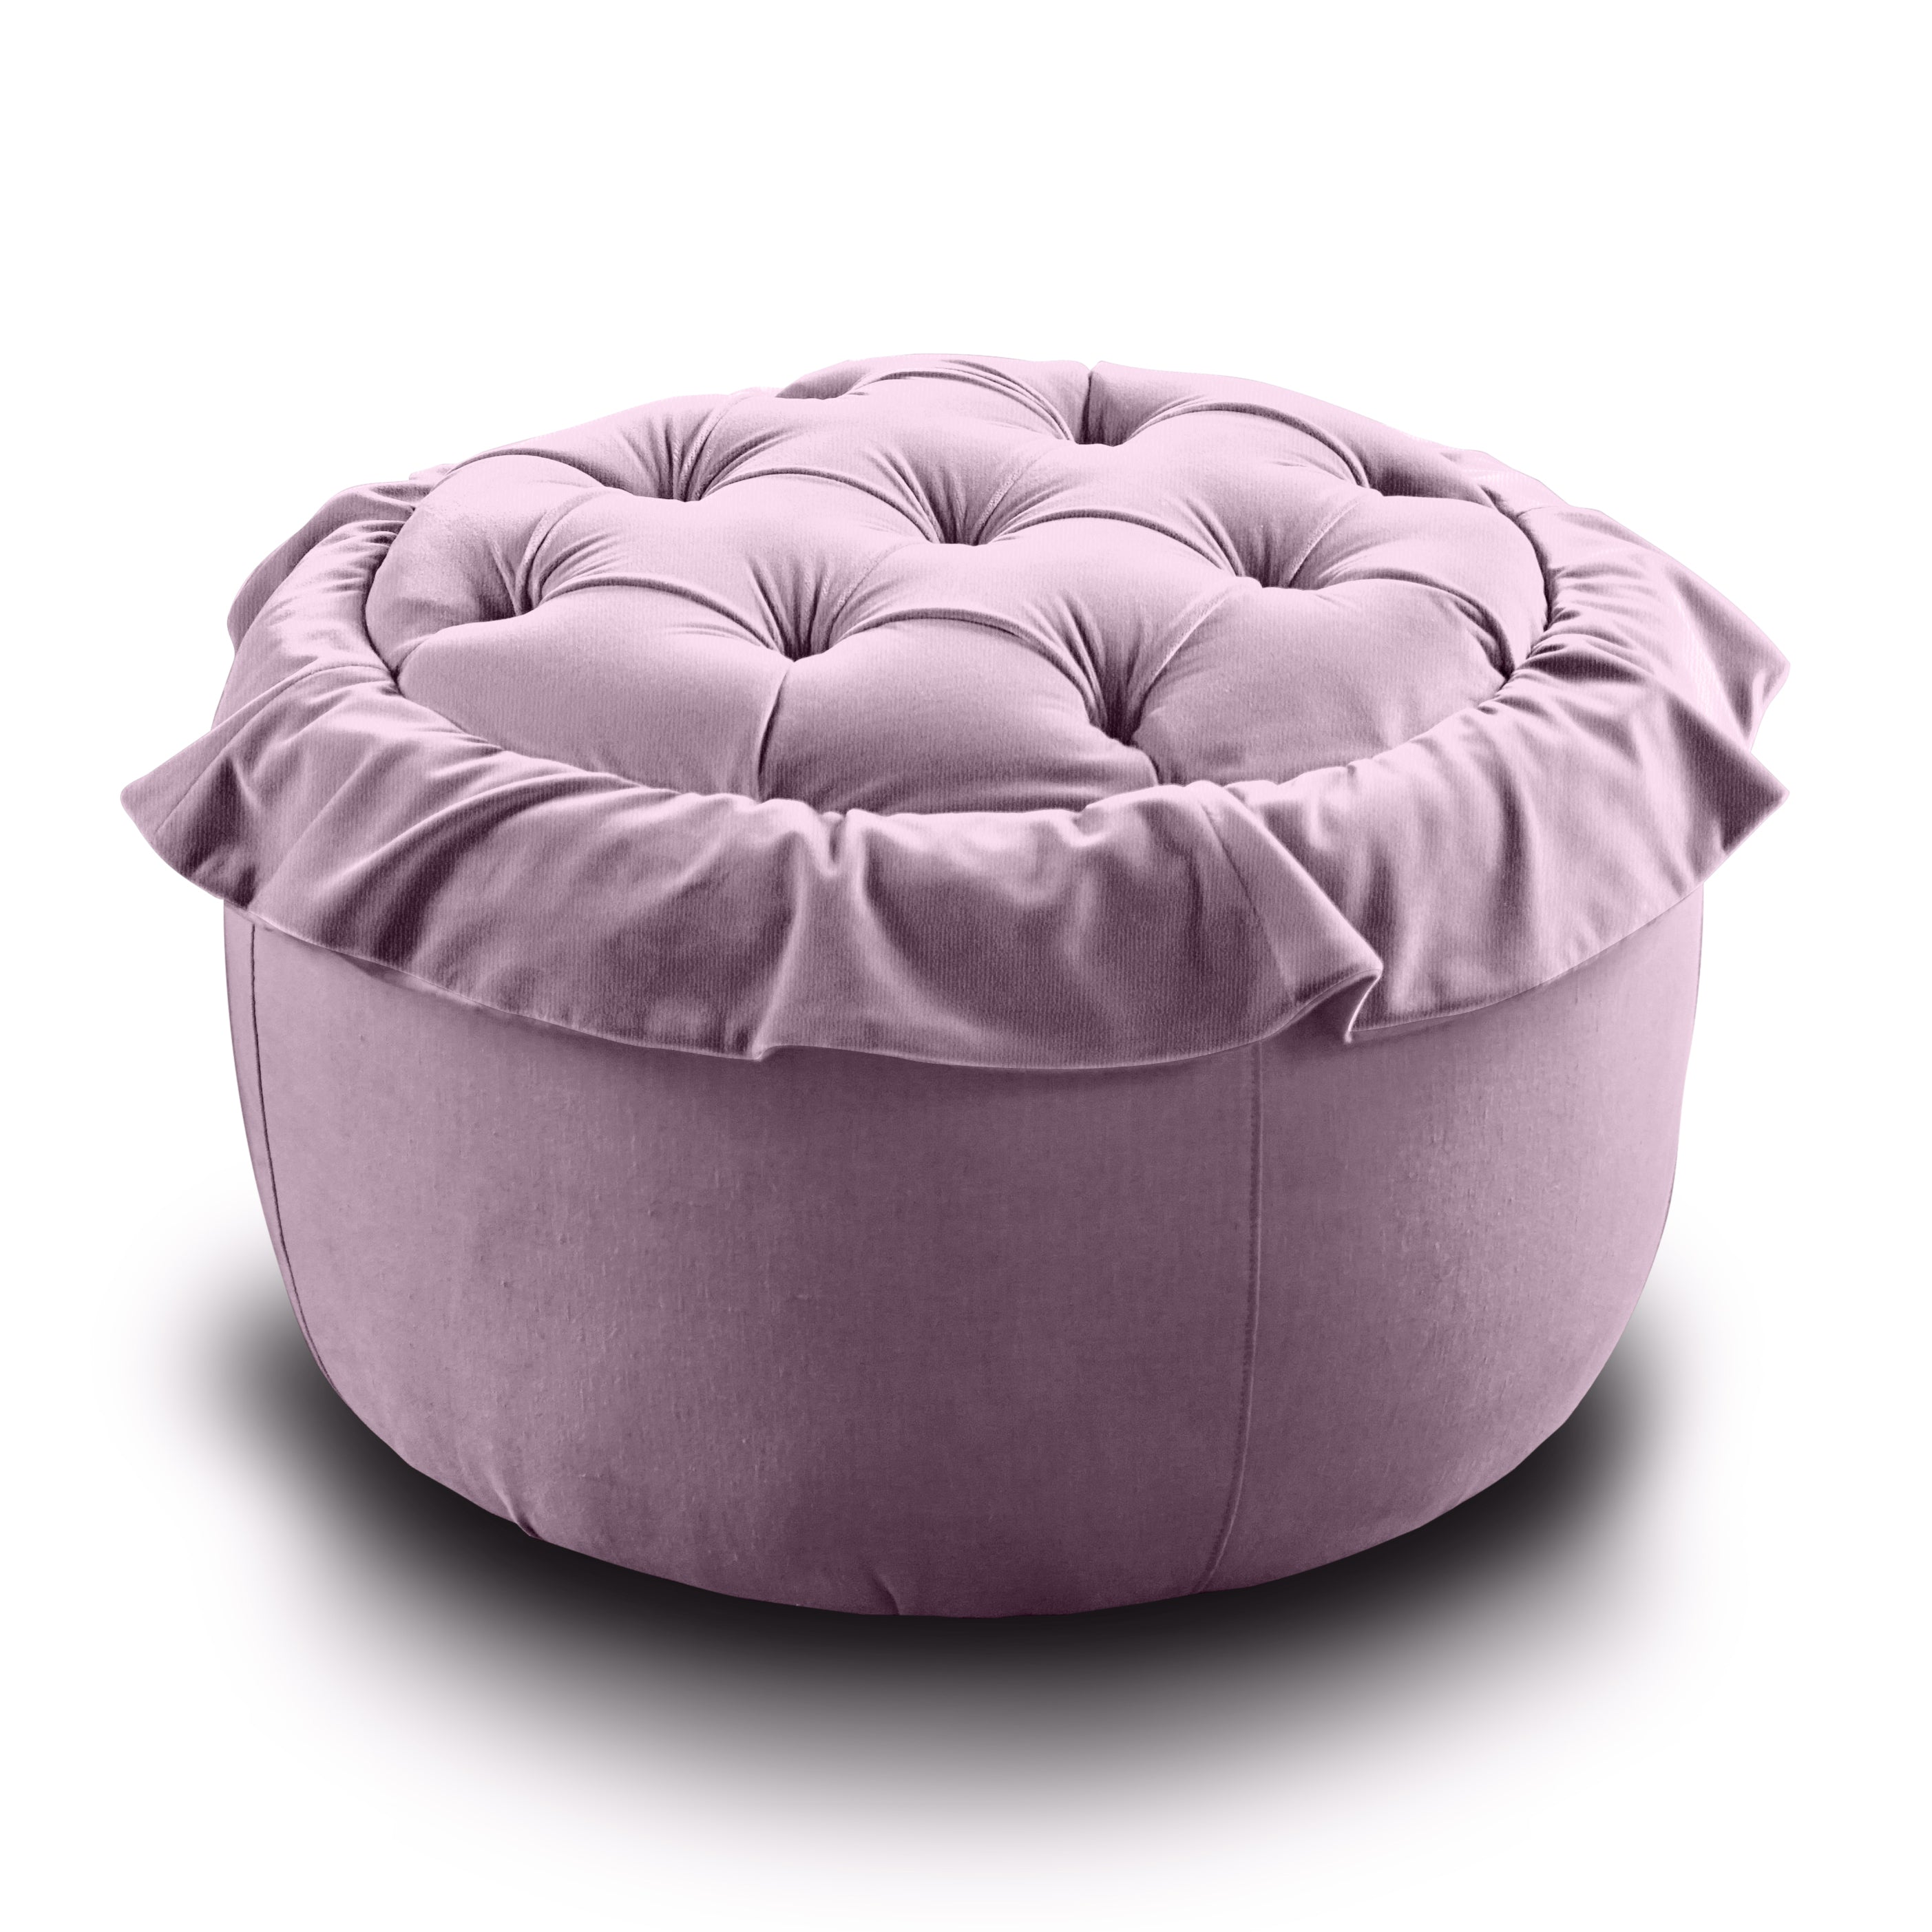 Stylish and Functional Pouf